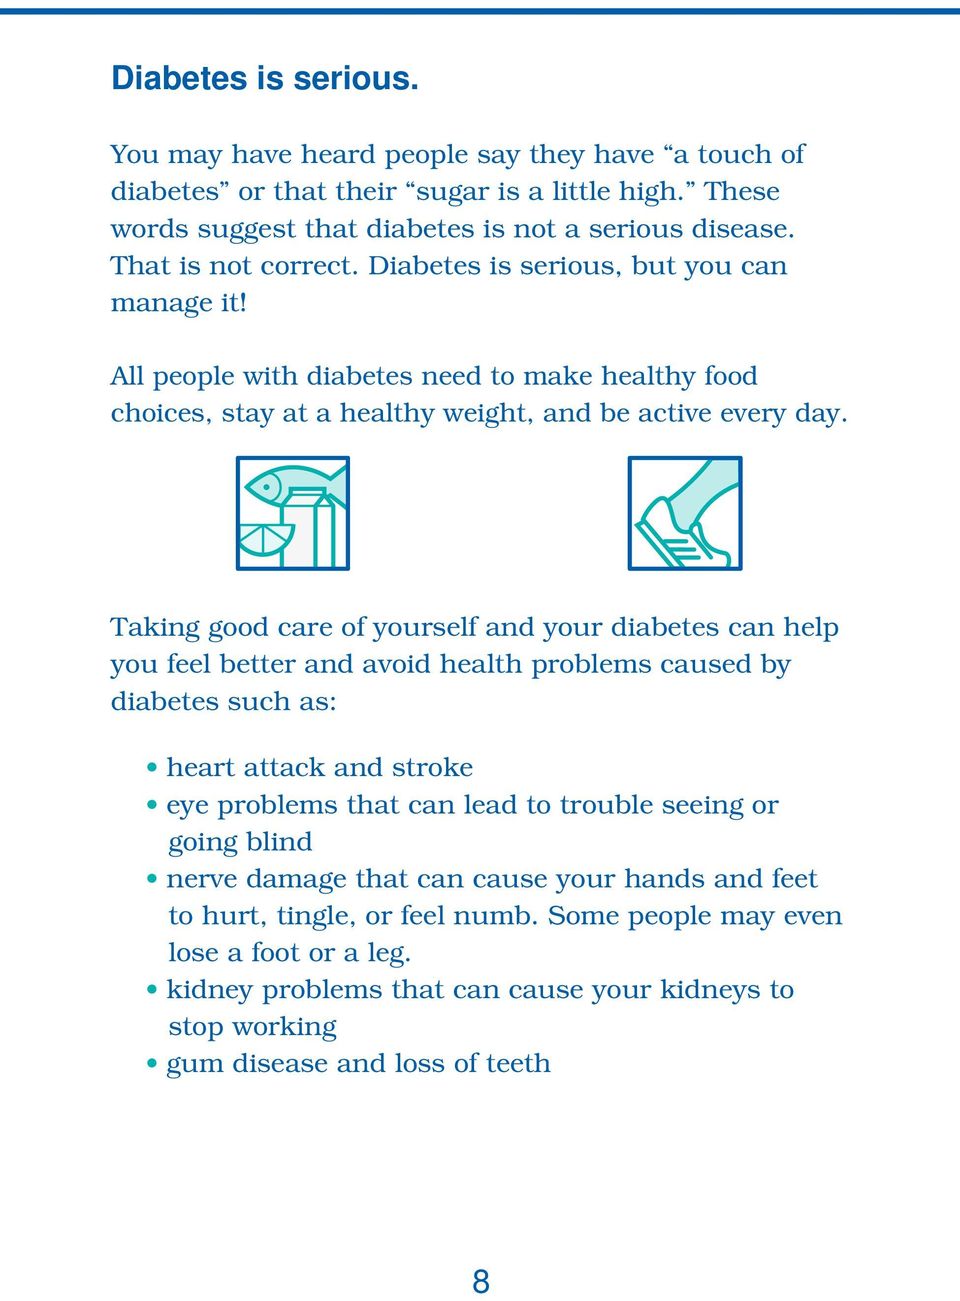 Taking good care of yourself and your diabetes can help you feel better and avoid health problems caused by diabetes such as: heart attack and stroke eye problems that can lead to trouble